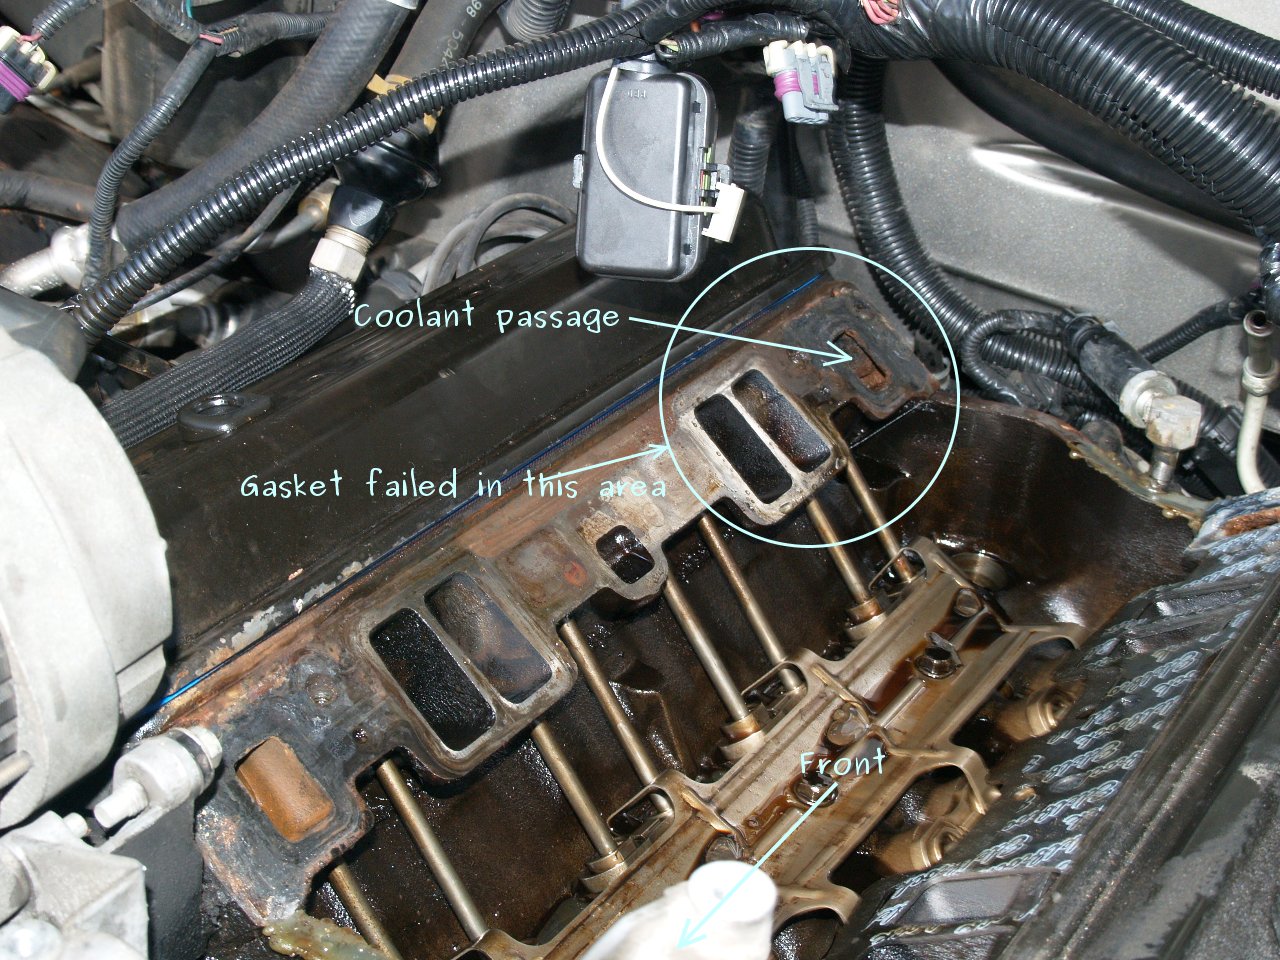 See P0022 in engine